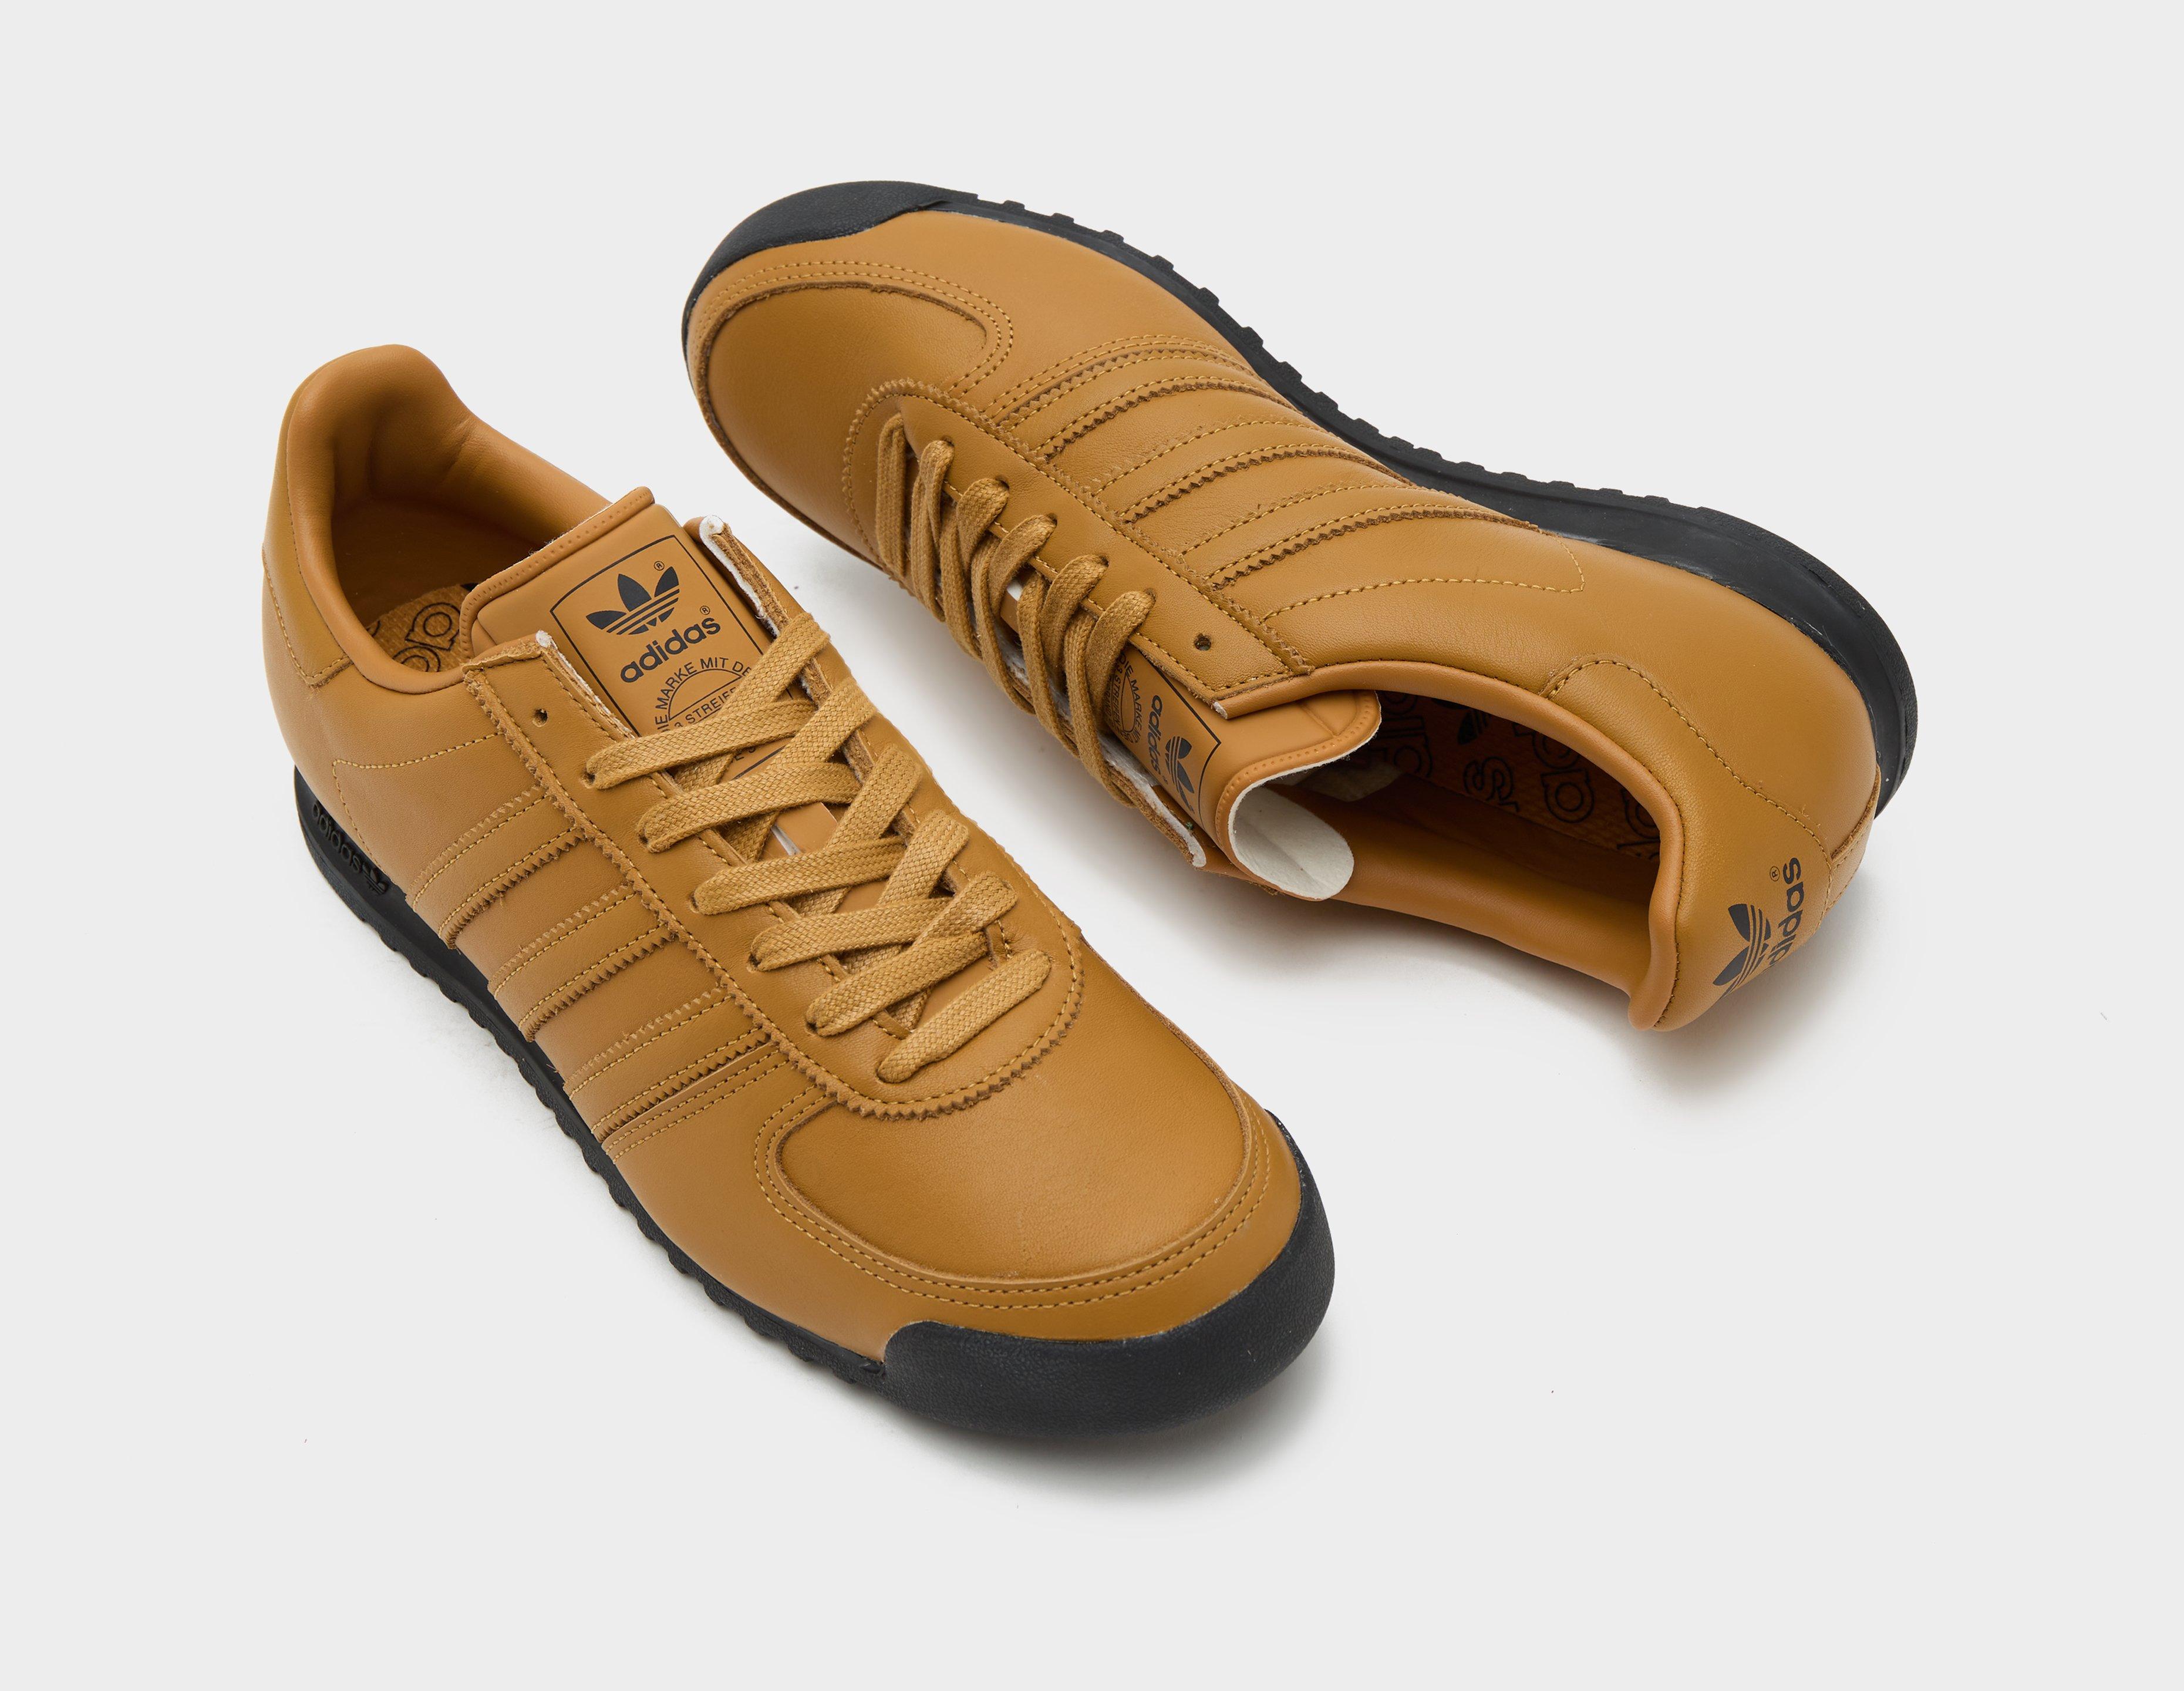 dress Originals shoes - adidas sale brands Archive Team for - women dress exclusive Healthdesign? Women\'s and | All adidas Brown puma